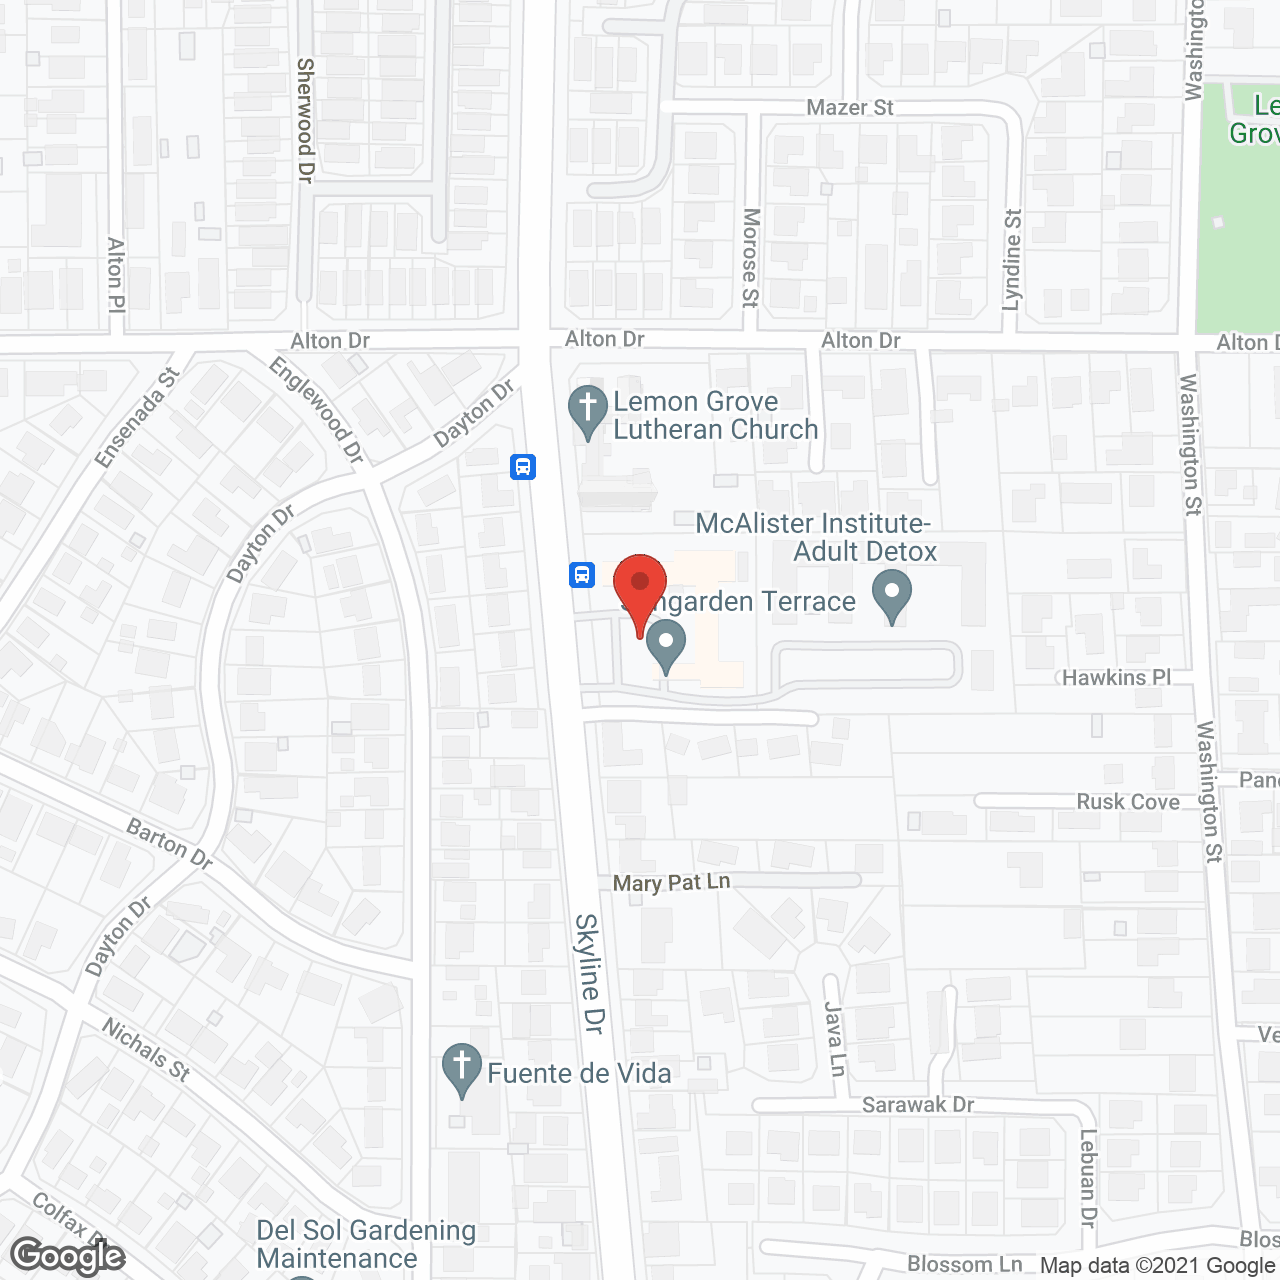 Sungarden Terrace Assisted Living and Memory Care in google map